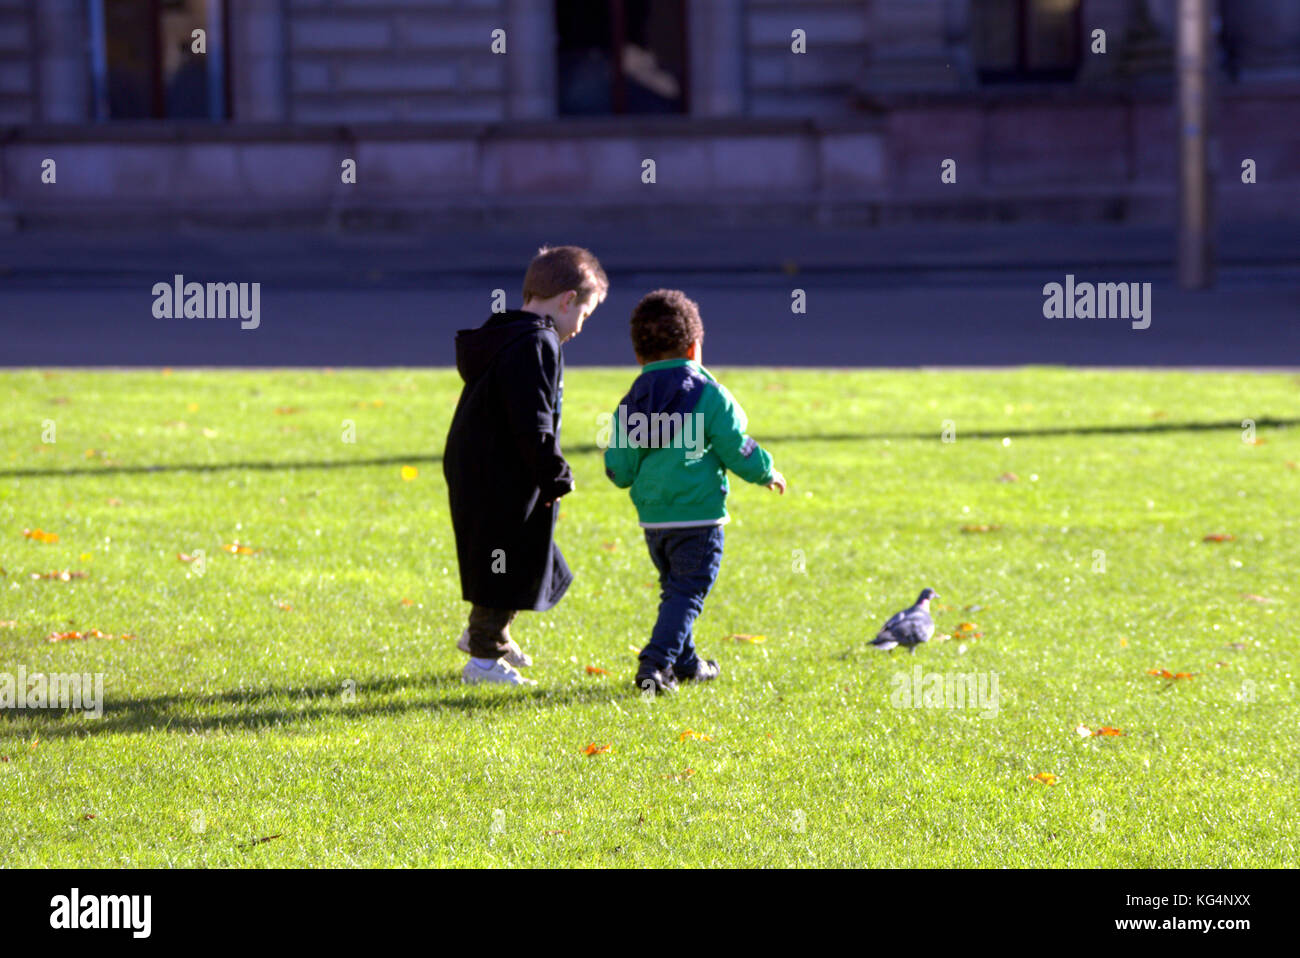 young children kids small boys  one black one white chasing a pigeon on grass viewed from behind Stock Photo